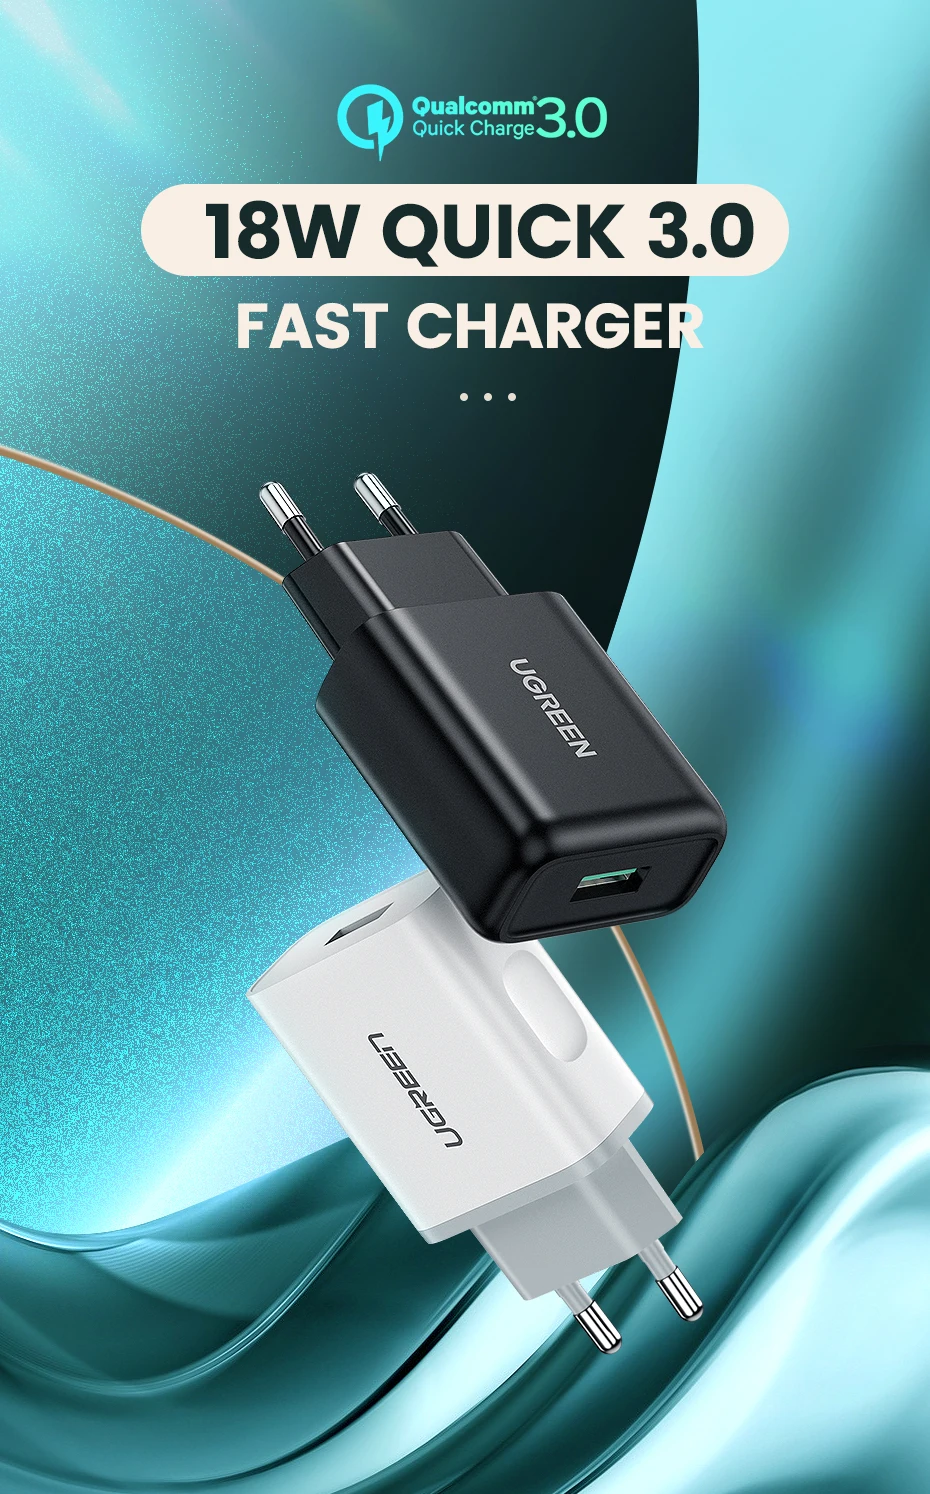 12 v usb UGREEN Quick 3.0 Charge USB Charger QC3.0 Fast Charger for Xiaomi Samsung iPhone USB Wall EU Adapter Mobile Phone Charger charger 100w